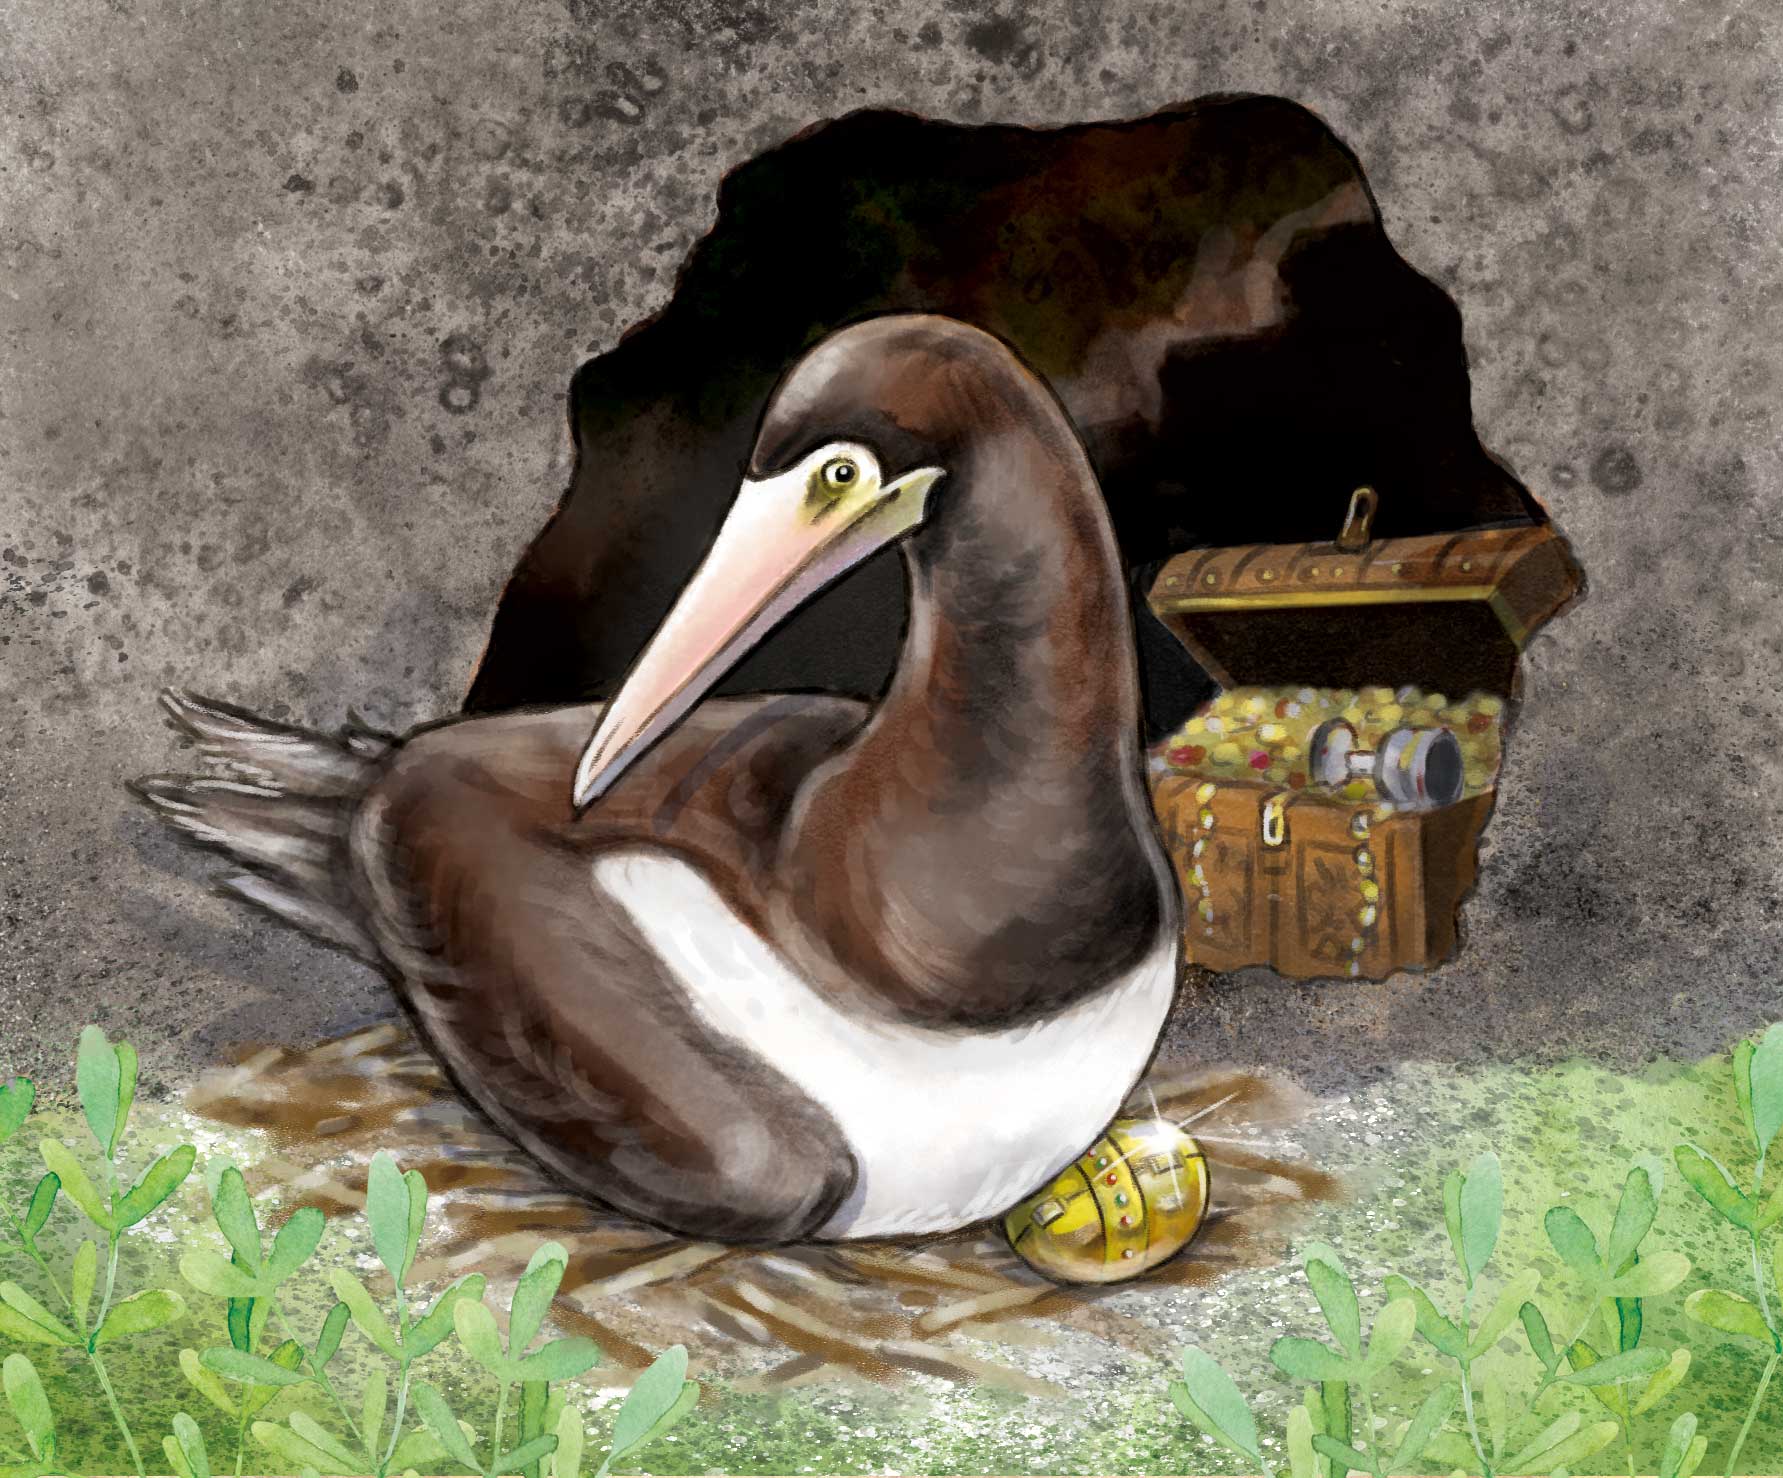 Illustration of a bird hatching a golden egg, with a pirate treasure box in the background.